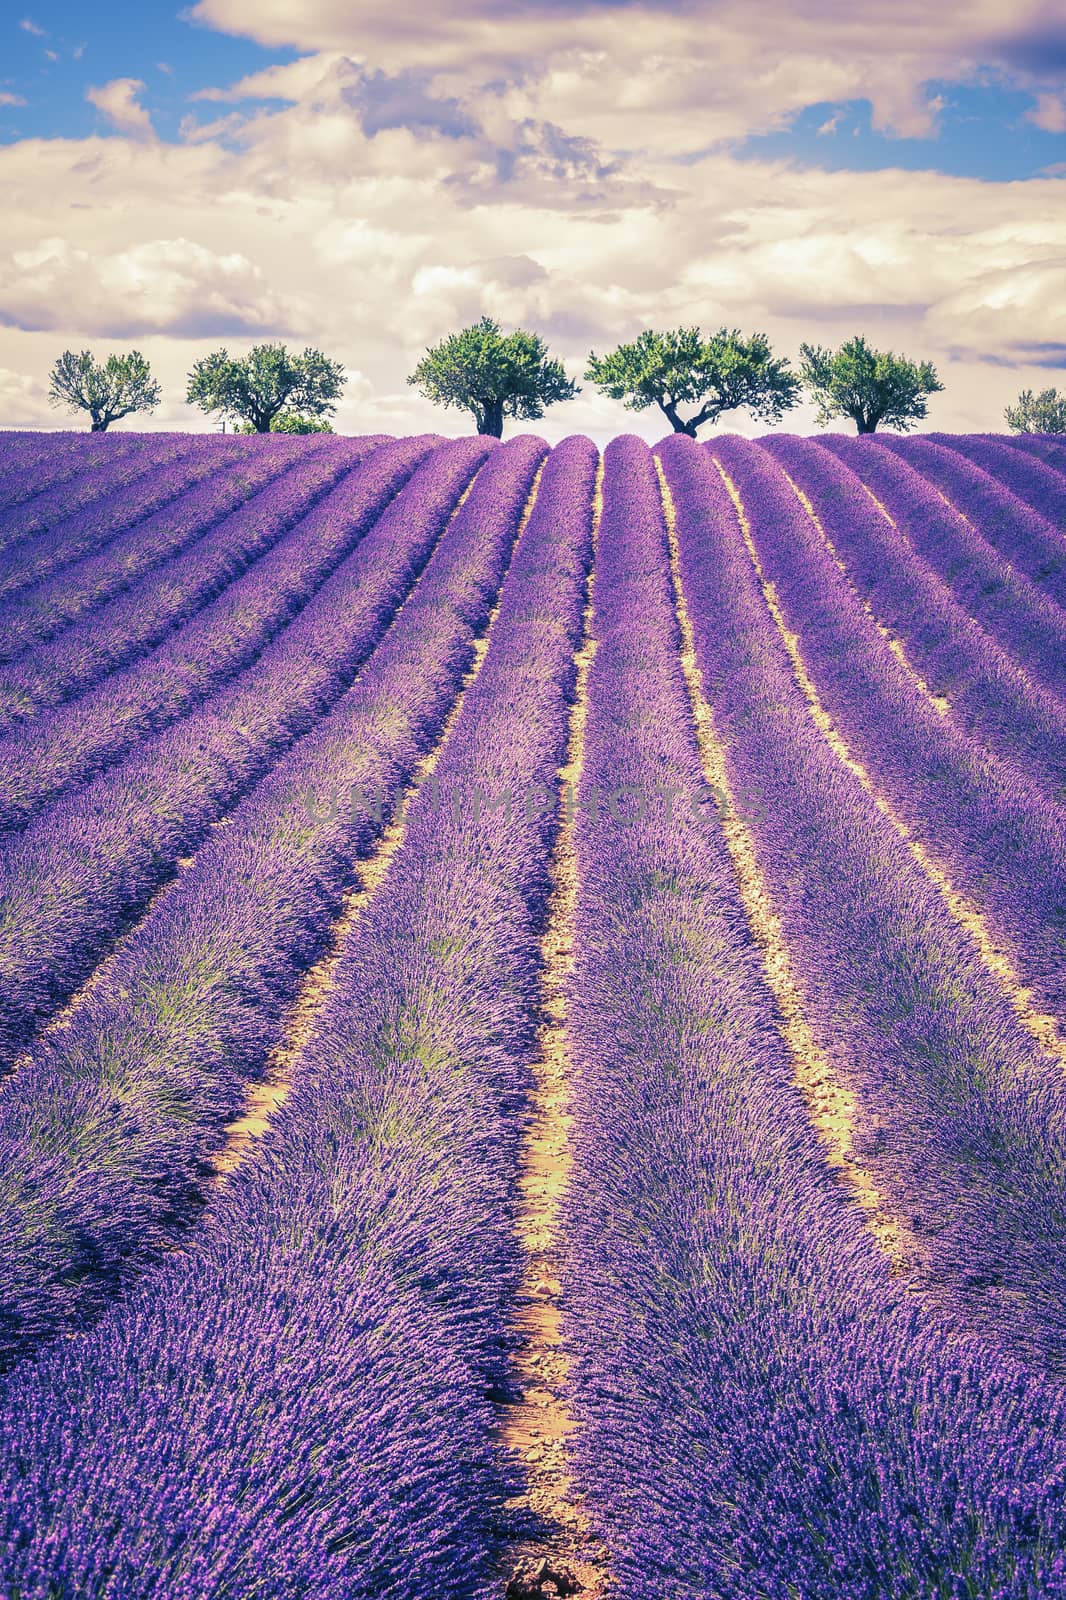 Lavender field with trees by vwalakte